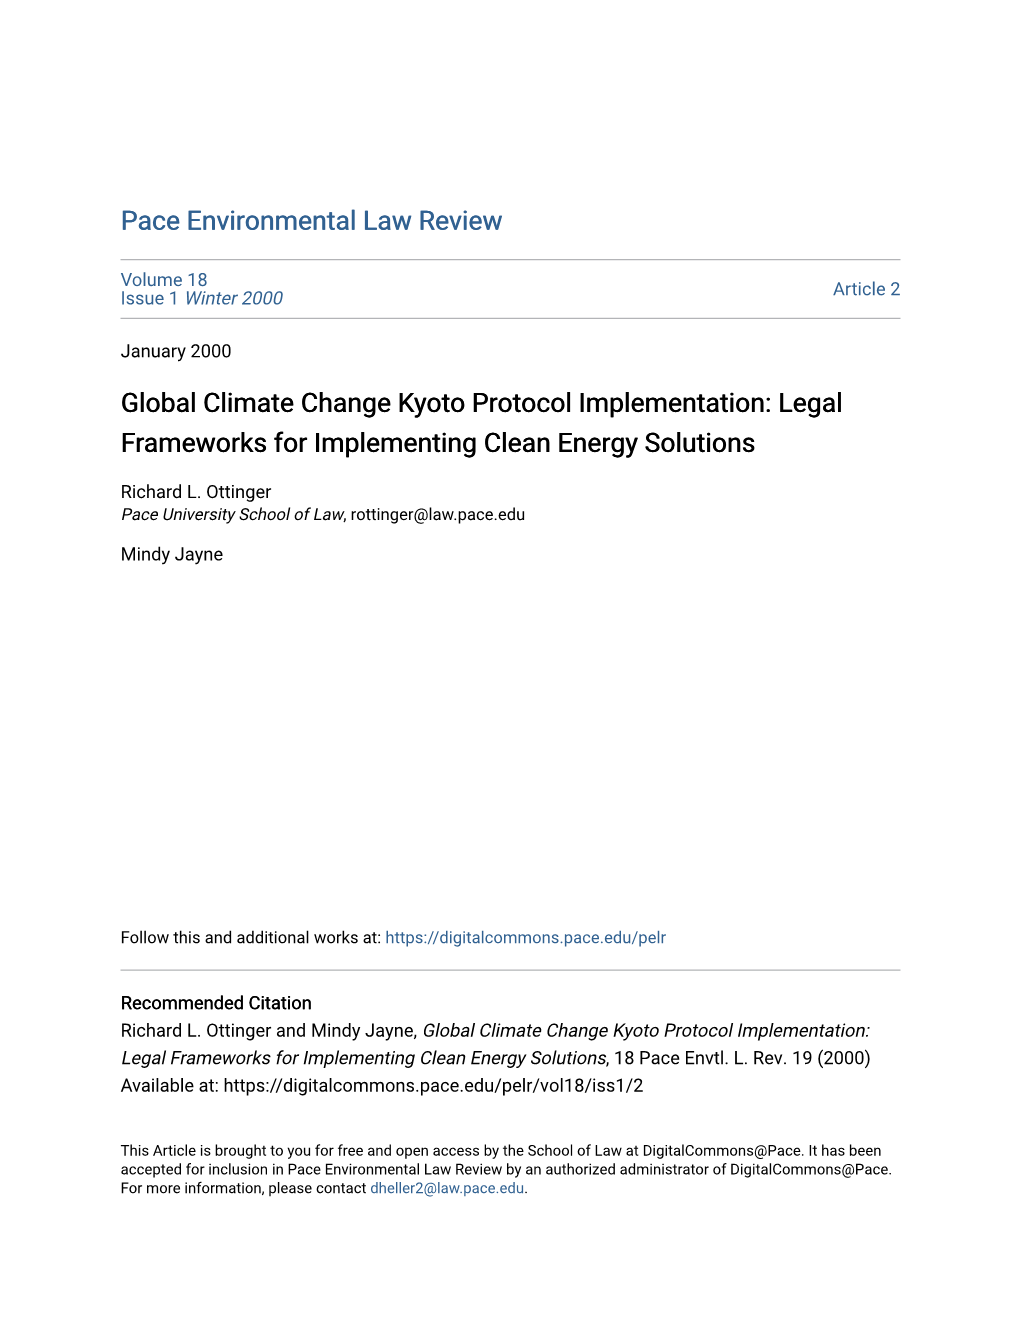 Global Climate Change Kyoto Protocol Implementation: Legal Frameworks for Implementing Clean Energy Solutions